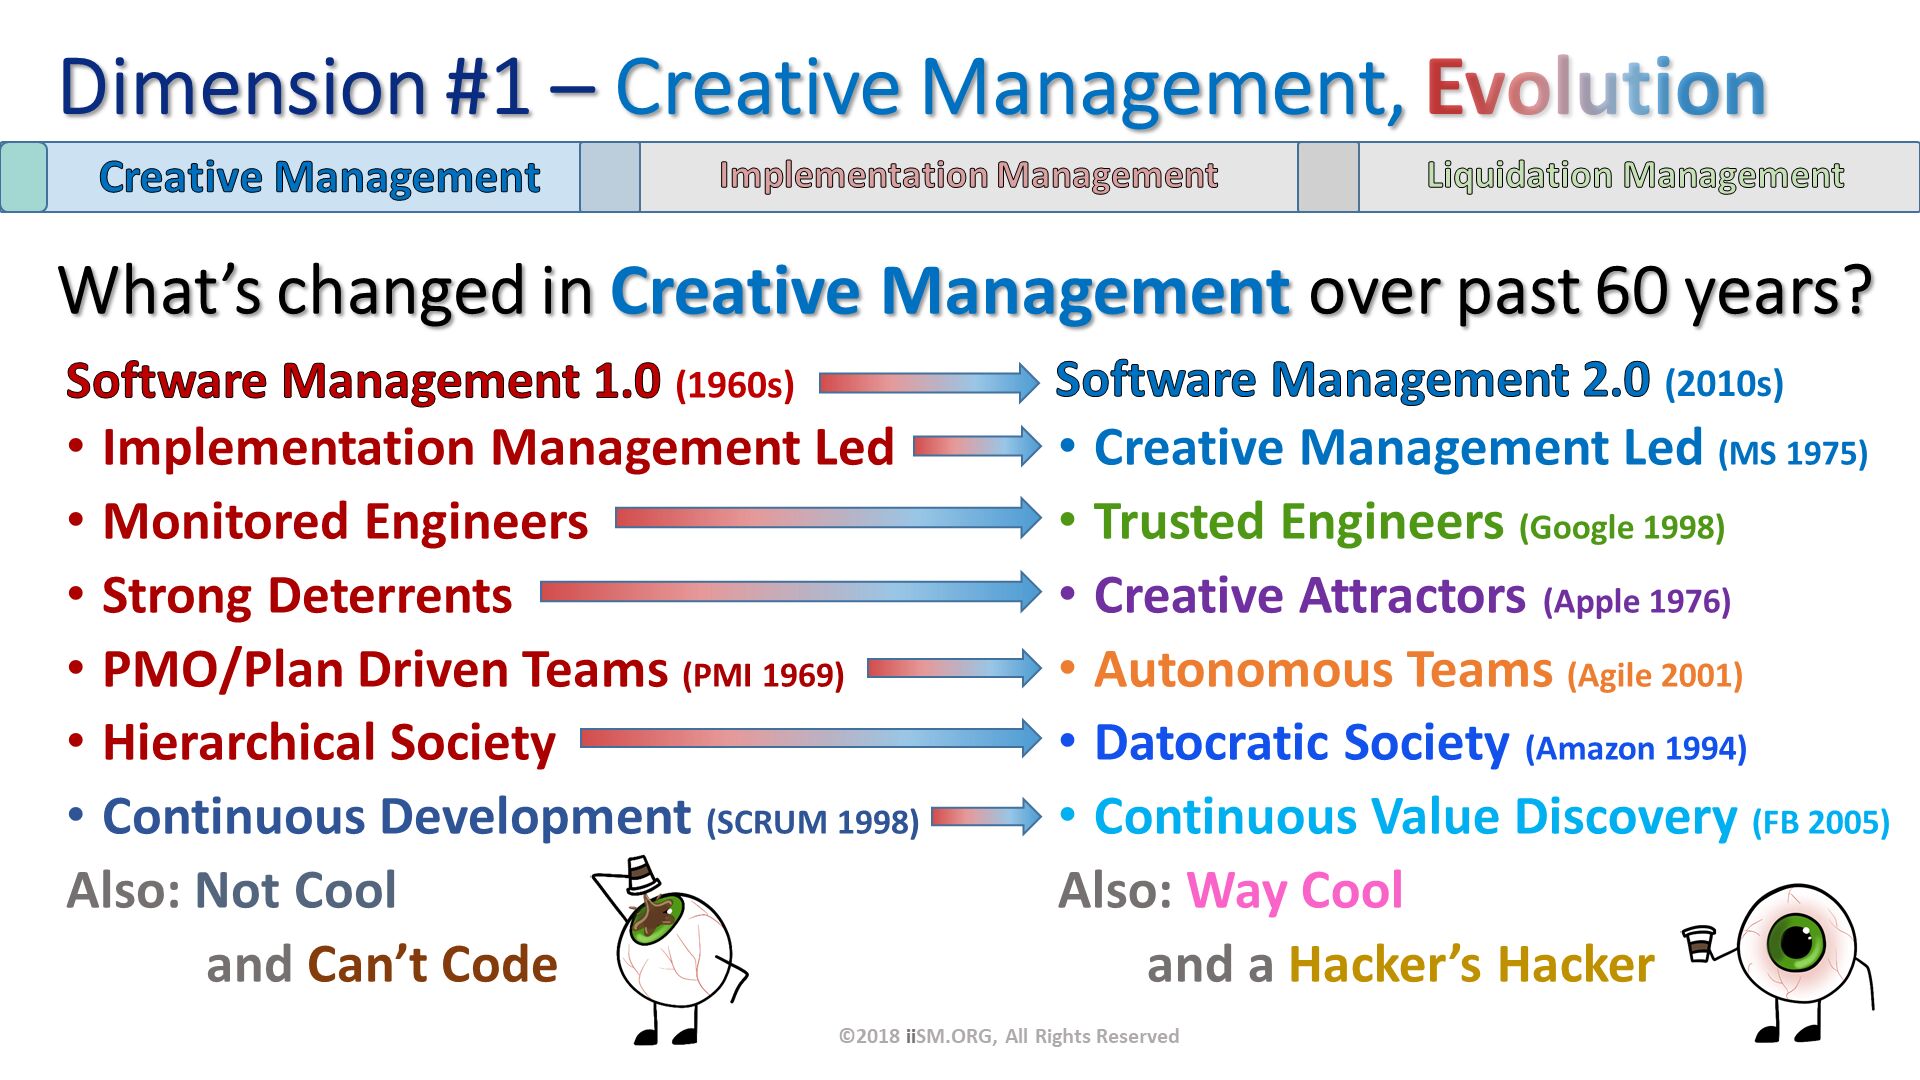 Software Management 2.0 (2010s). Creative Management Led (MS 1975)
Trusted Engineers (Google 1998)
Creative Attractors (Apple 1976)
Autonomous Teams (Agile 2001) 
Datocratic Society (Amazon 1994)
Continuous Value Discovery (FB 2005)
Also: Way Cool 
       and a Hacker’s Hacker. Software Management 1.0 (1960s). Implementation Management Led 
Monitored Engineers
Strong Deterrents 
PMO/Plan Driven Teams (PMI 1969)
Hierarchical Society 
Continuous Development (SCRUM 1998)
Also: Not Cool 
           and Can’t Code. Dimension #1 – Creative Management, Evolution. What’s changed in Creative Management over past 60 years? . ©2018 iiSM.ORG, All Rights Reserved. 